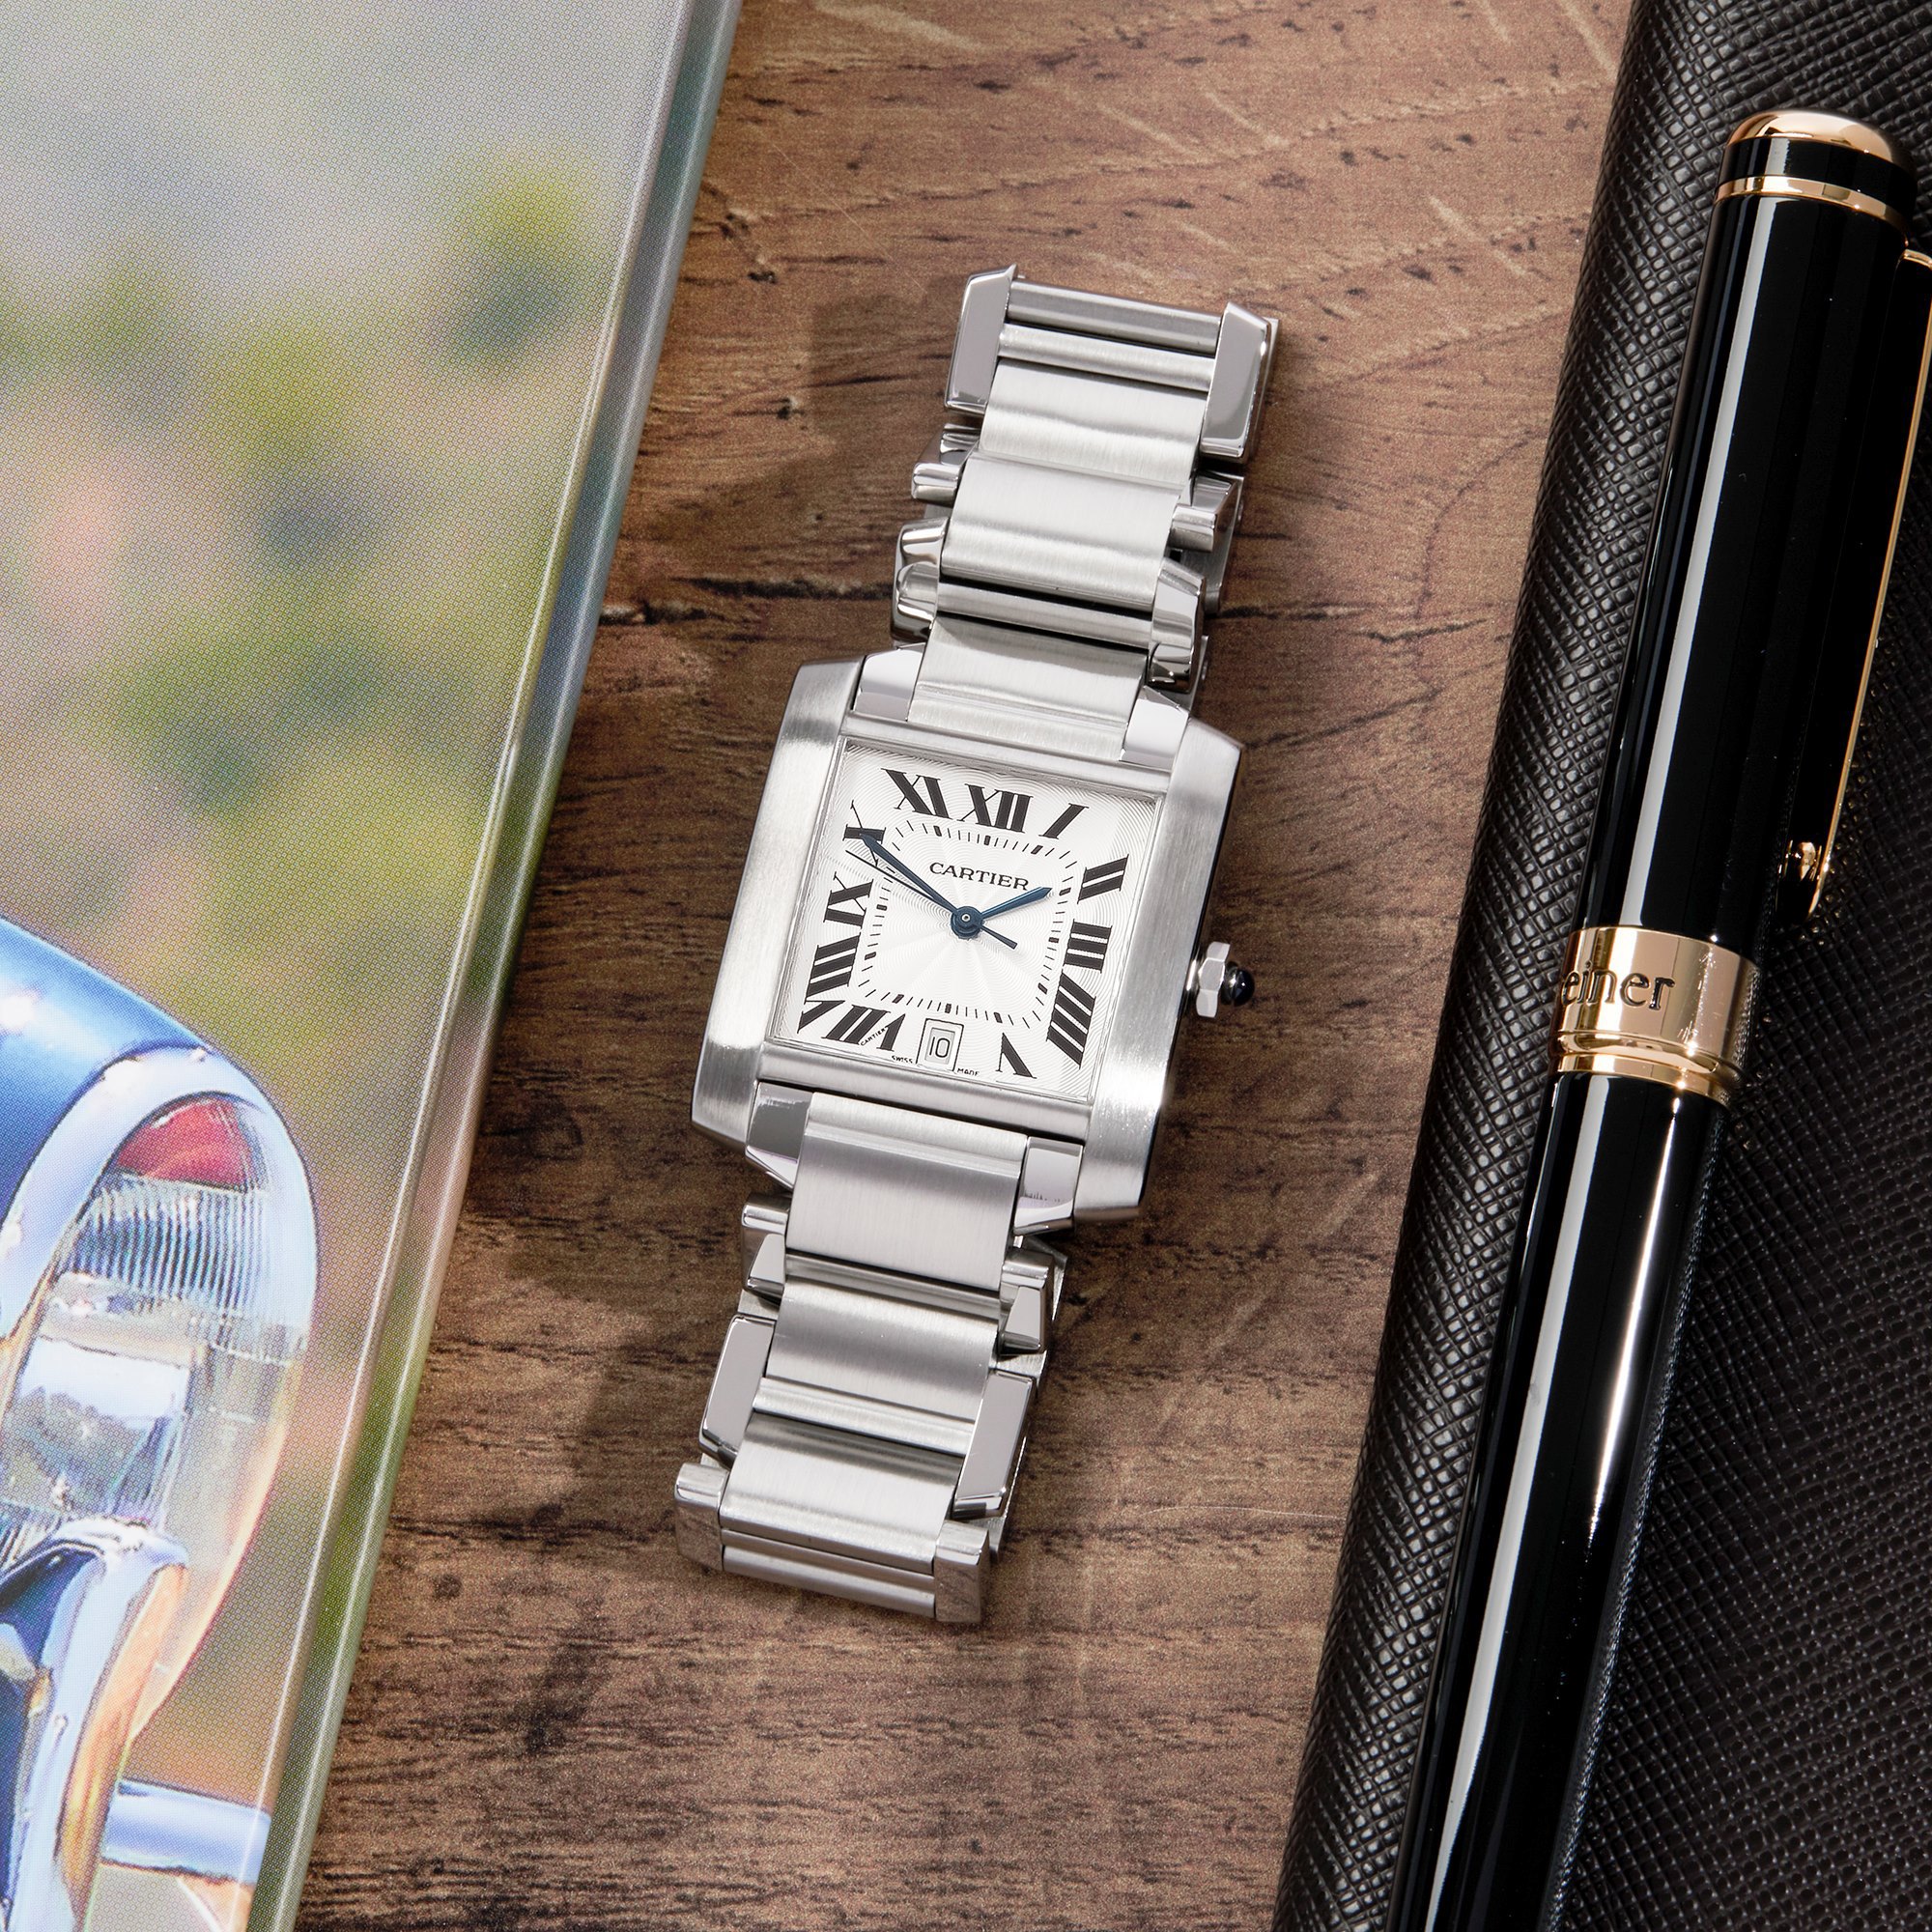 Cartier Tank Francaise Stainless Steel W51002Q3 or 2302